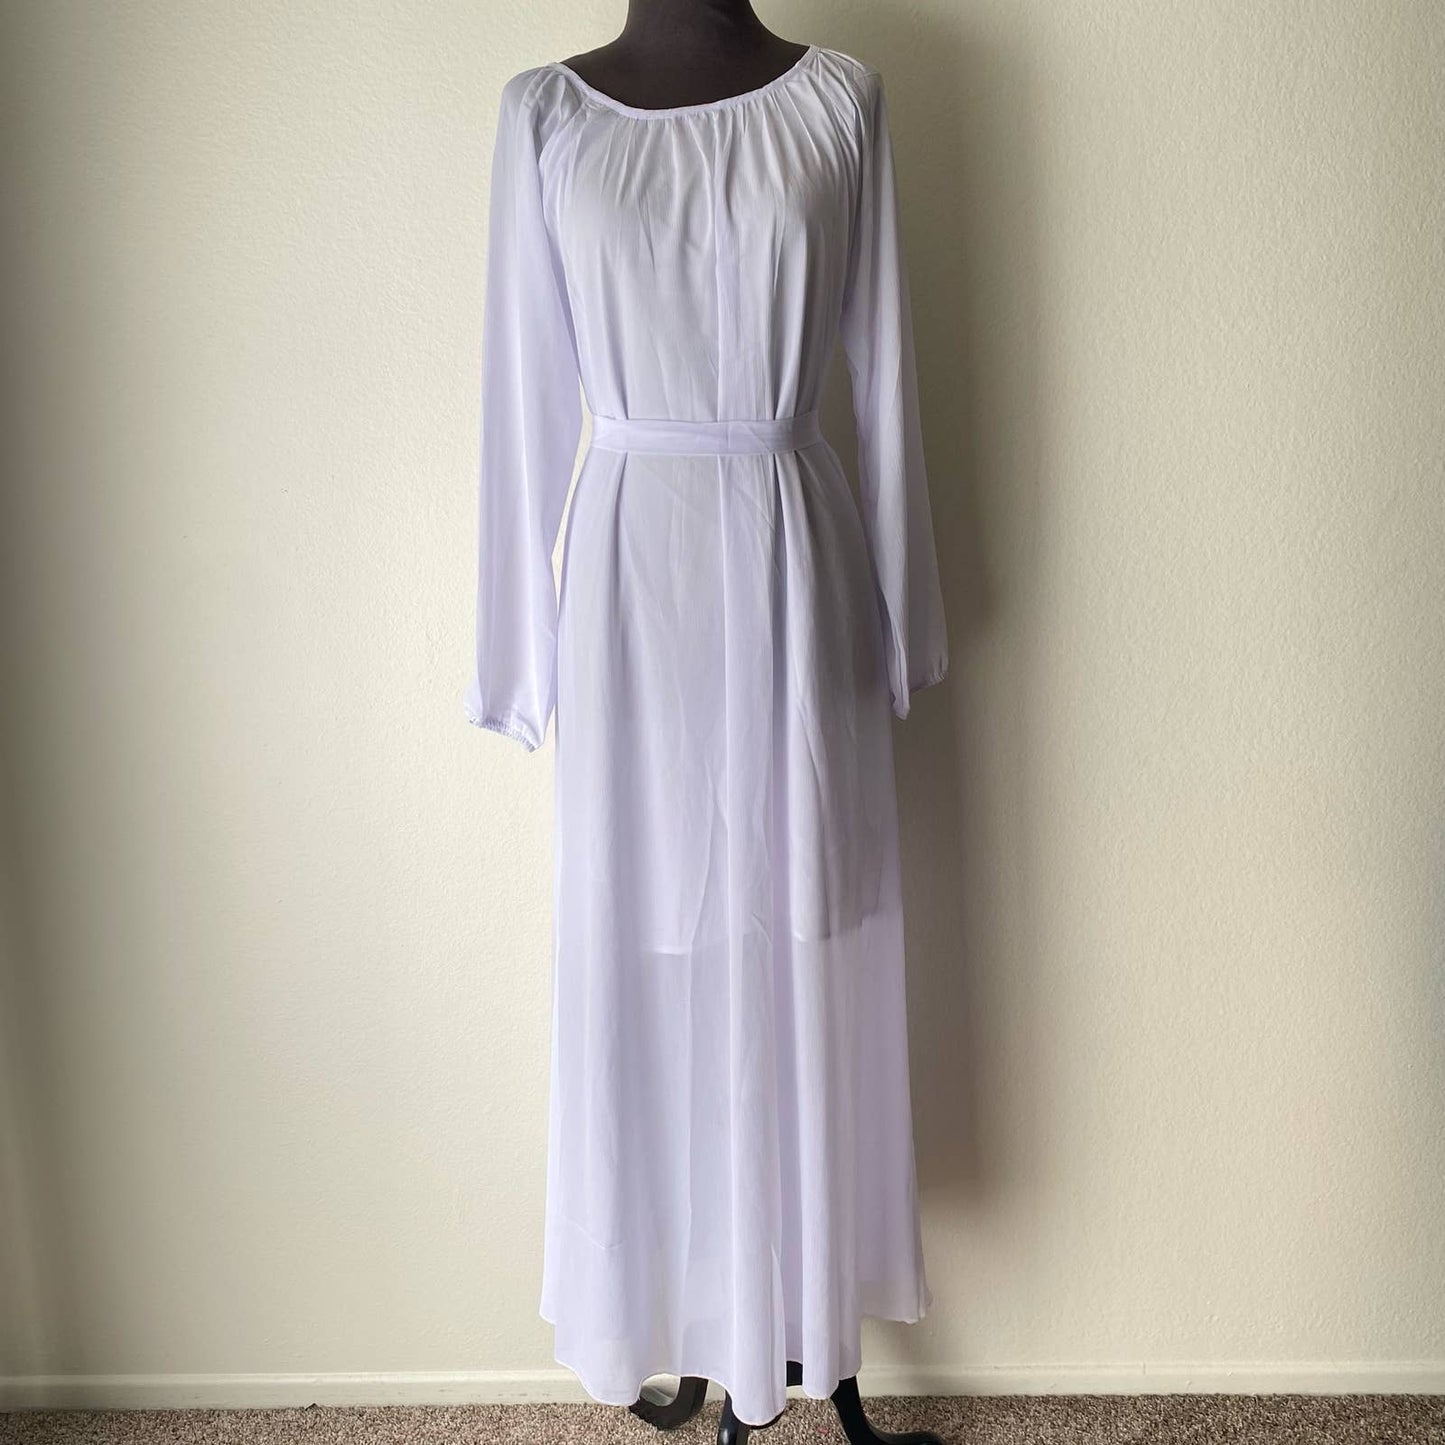 buenos Ninos B&N sz S boho long sleeve belted white gown  NWT